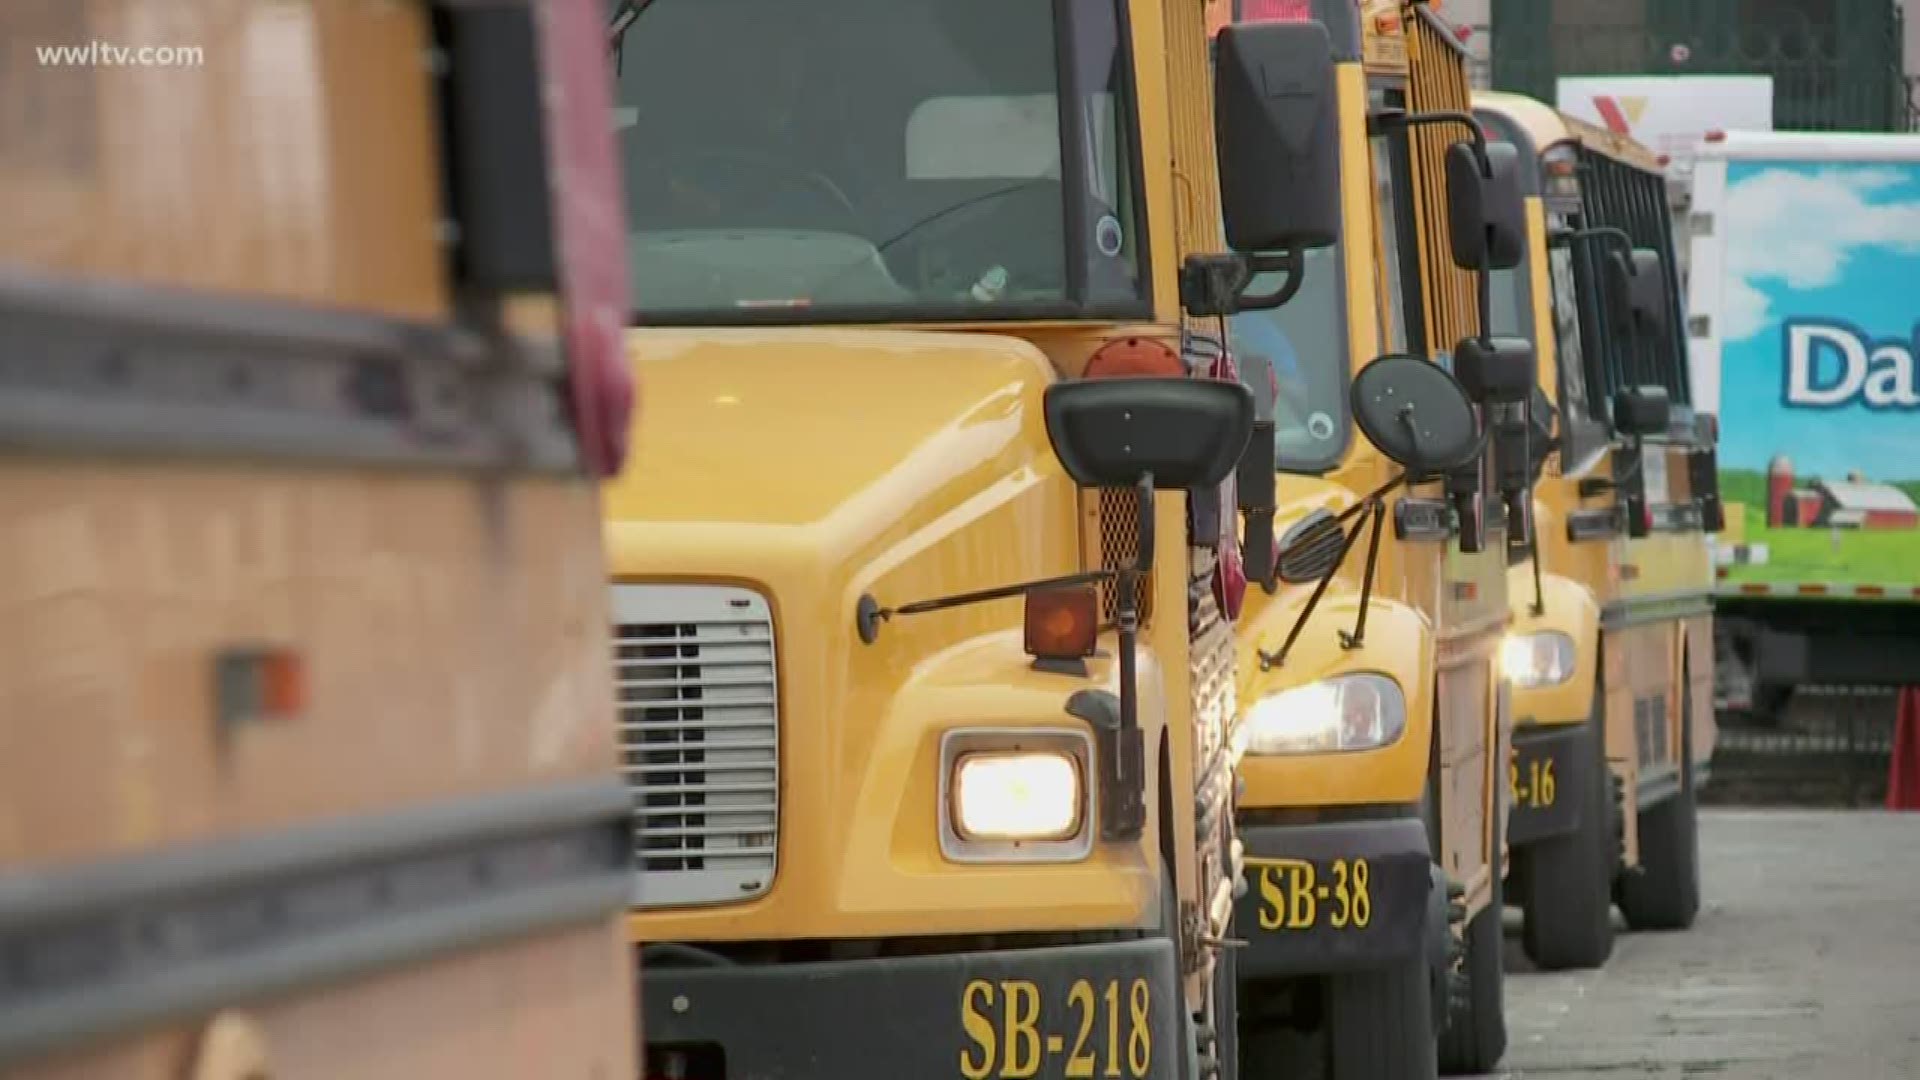 In the wake of WWL-TV’s “Taken for a Ride” investigation, the city of New Orleans stepped in and imposed new school bus regulations last February.